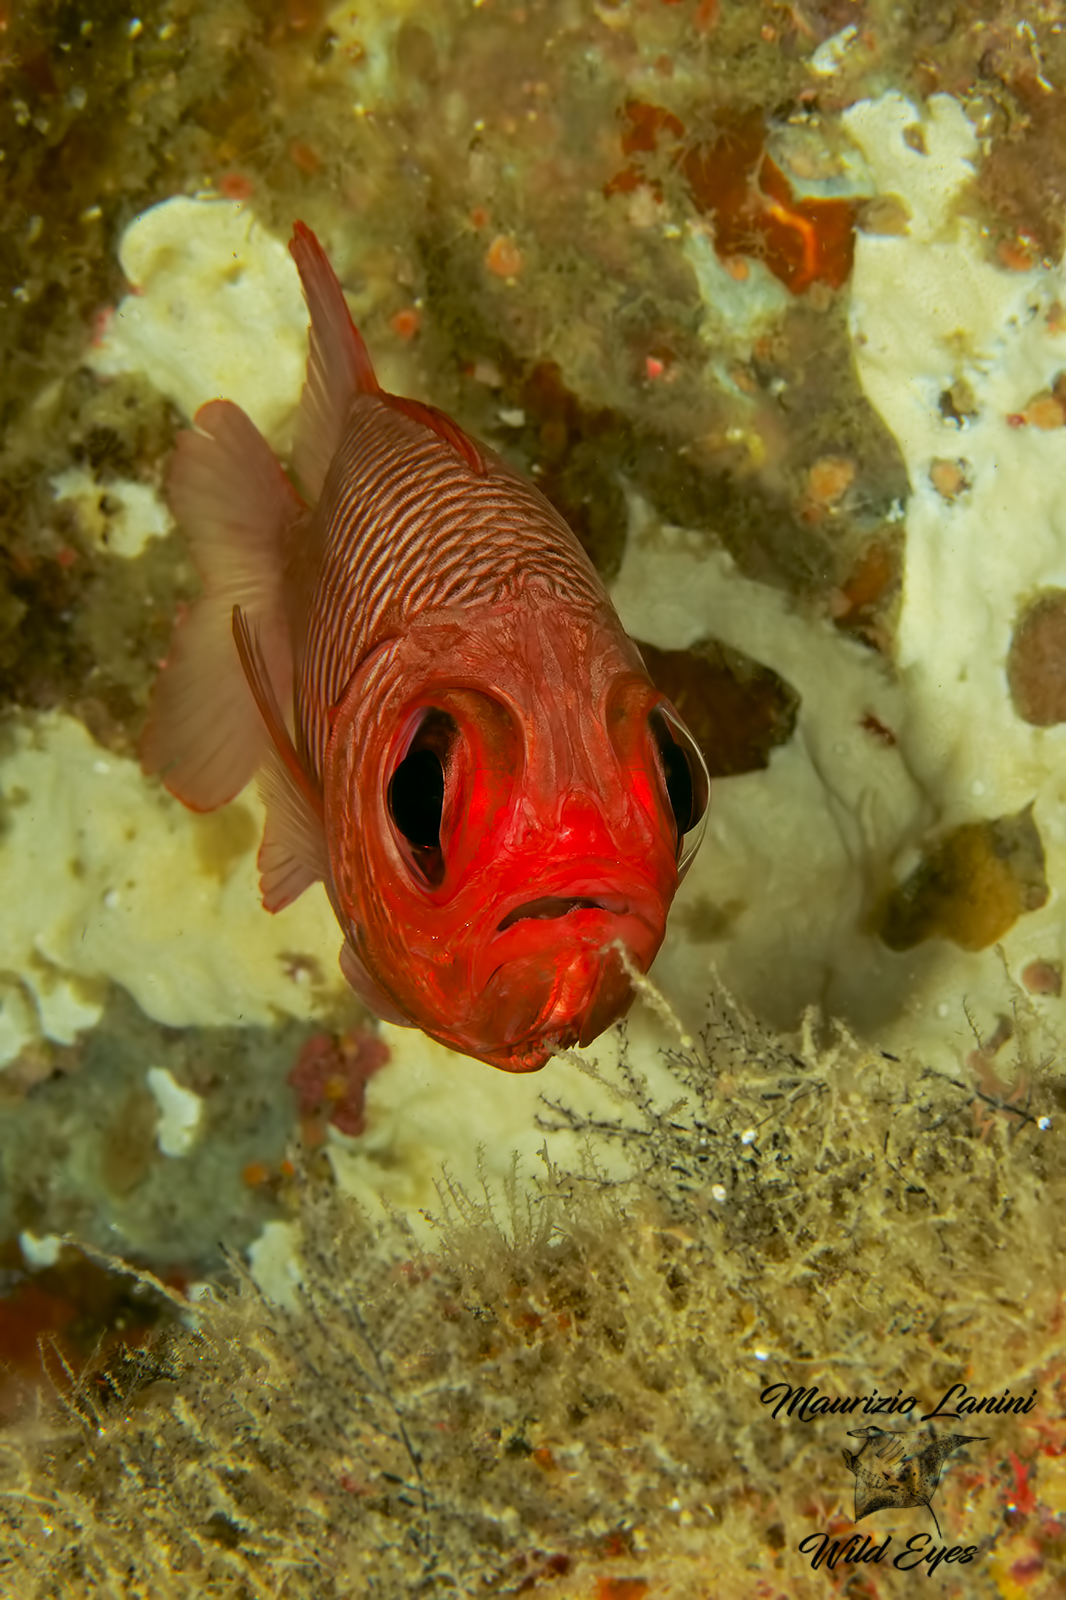 Pesce scoiattolo,Doubletooth soldierfish